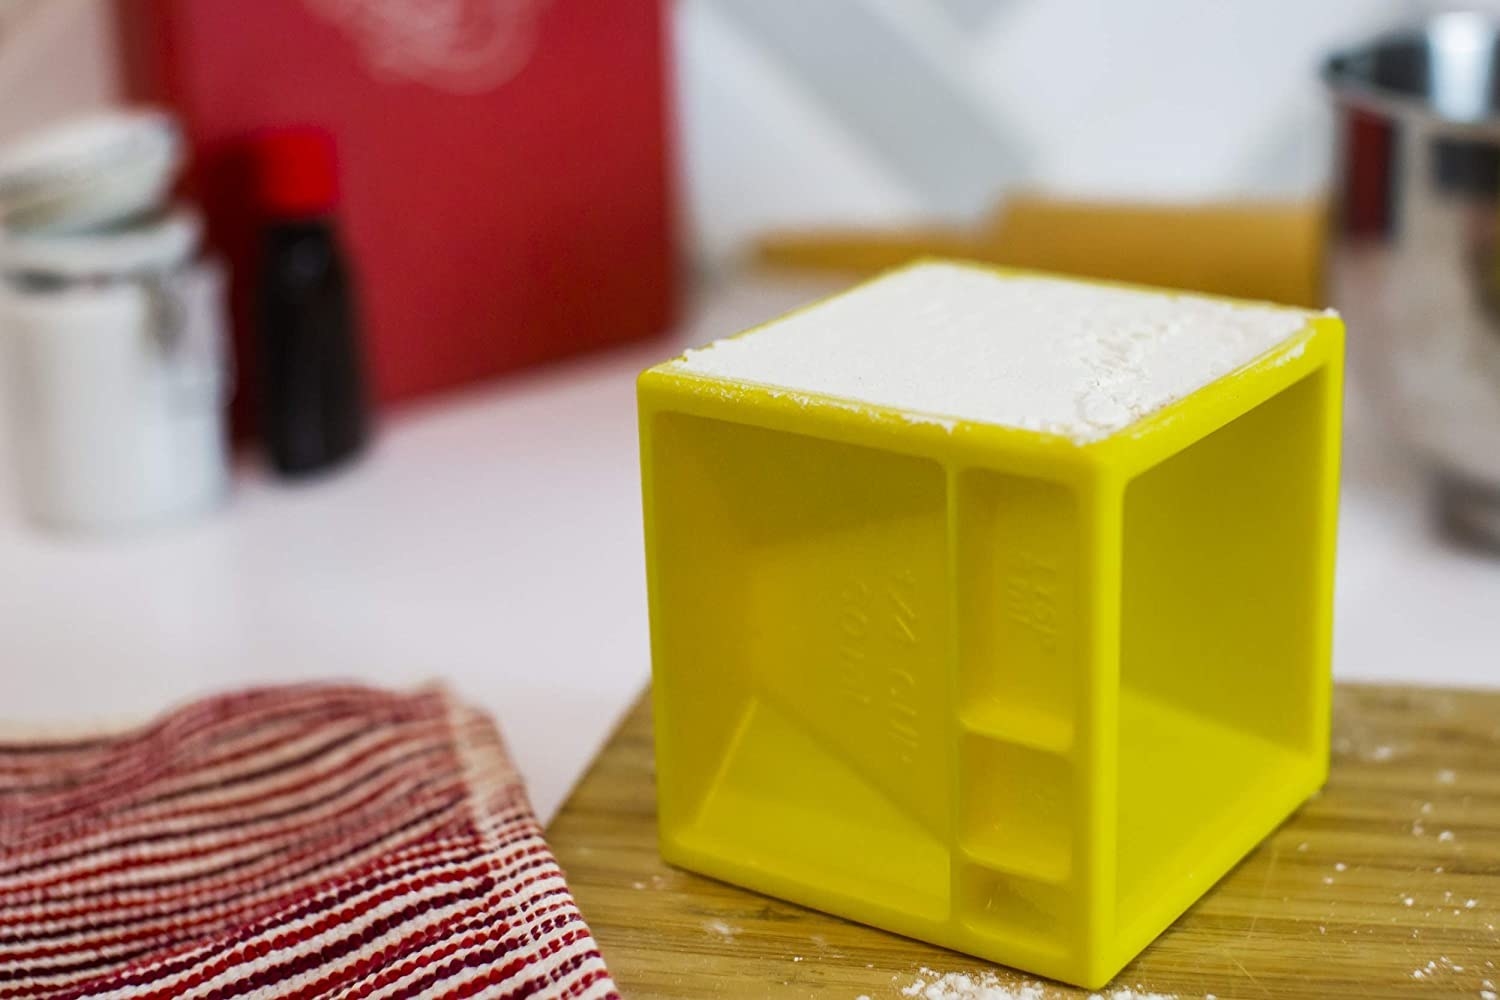 A yellow measuring cube with grooves measuring a 